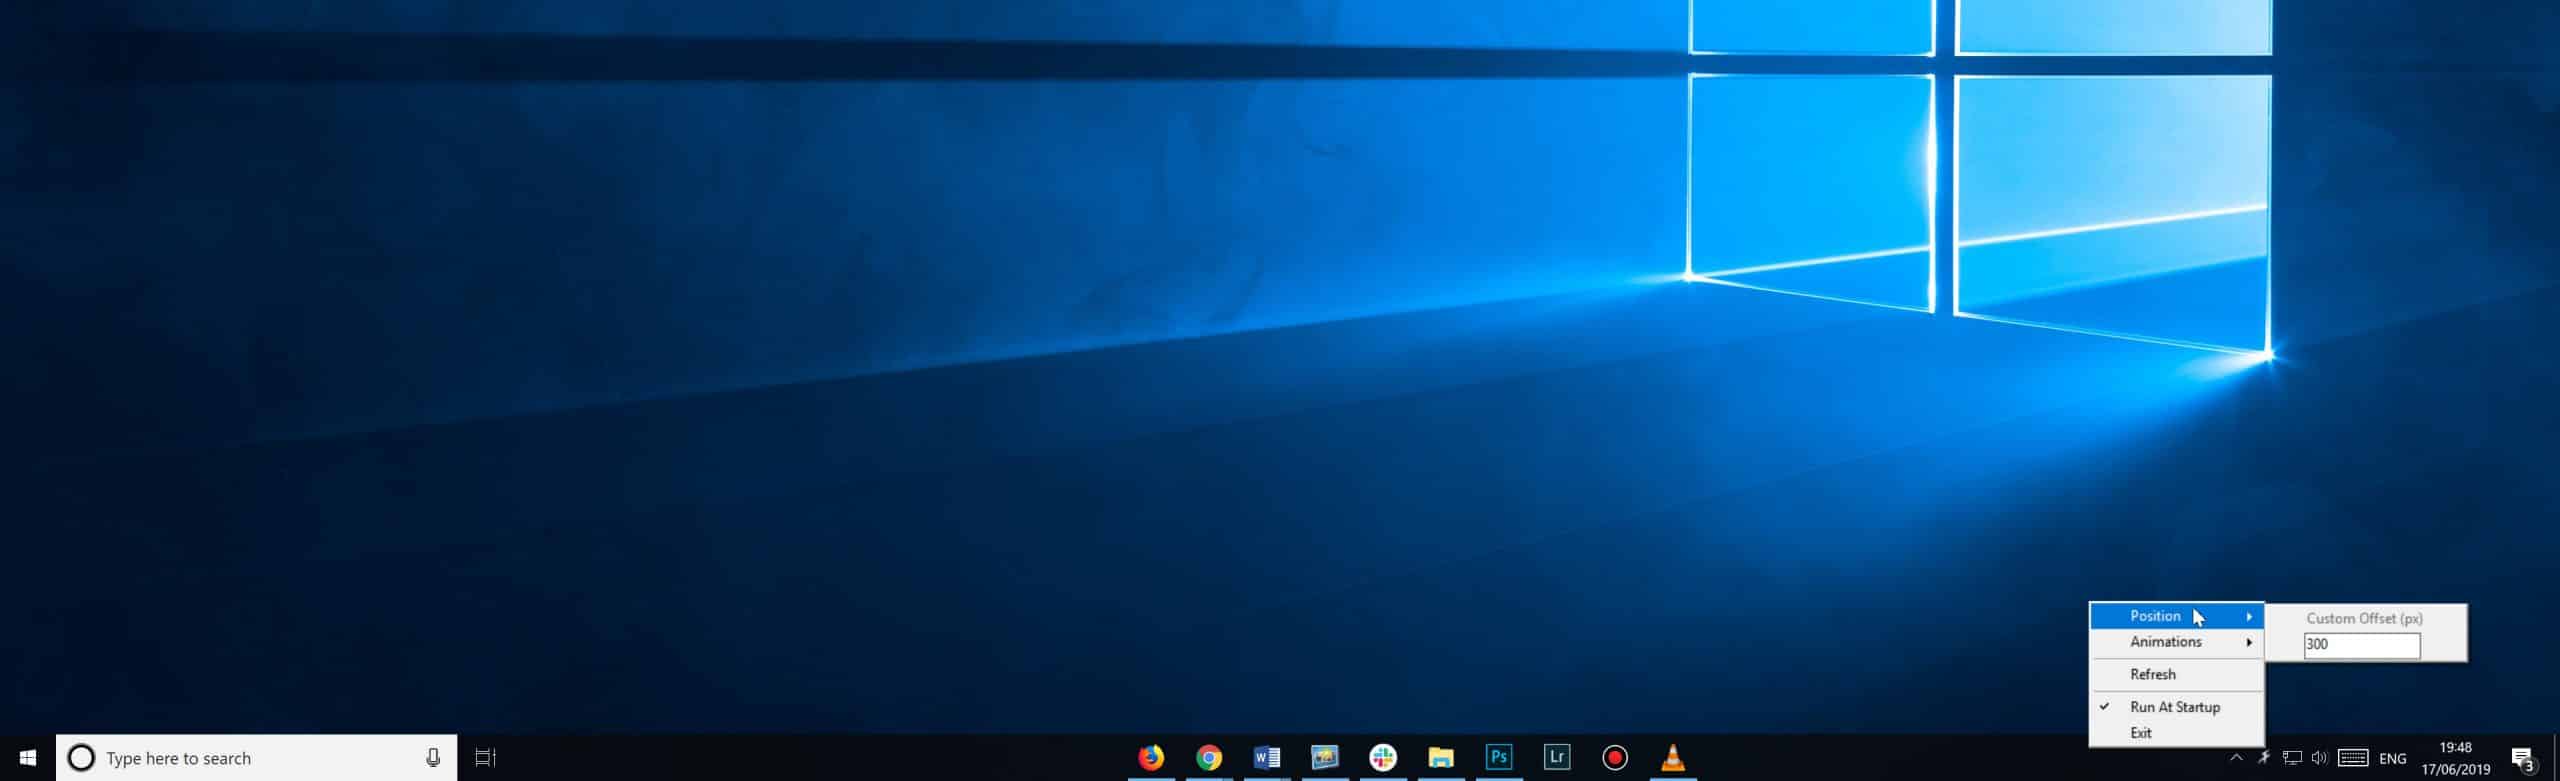 how-to-change-icon-picture-on-windows-10-ionmokasin